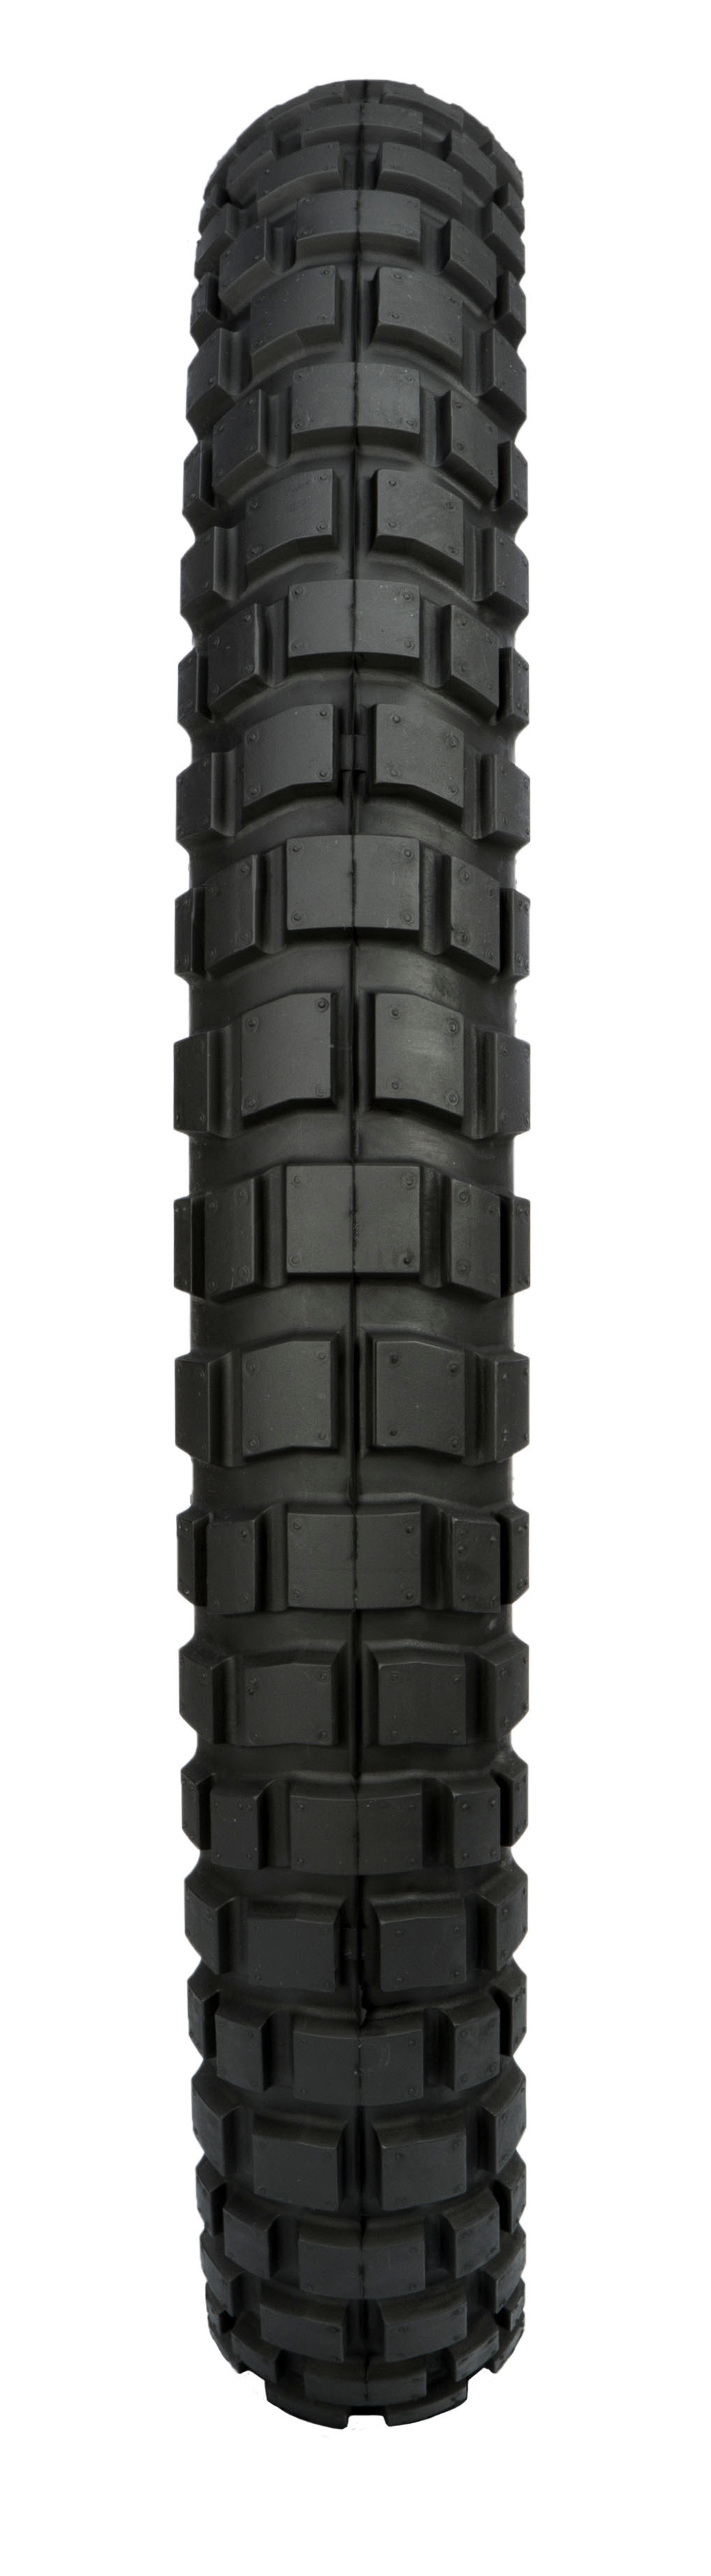 E804 Front Reflector Tire 90/90-21 54T BIAS Adventure Trail Series - Click Image to Close